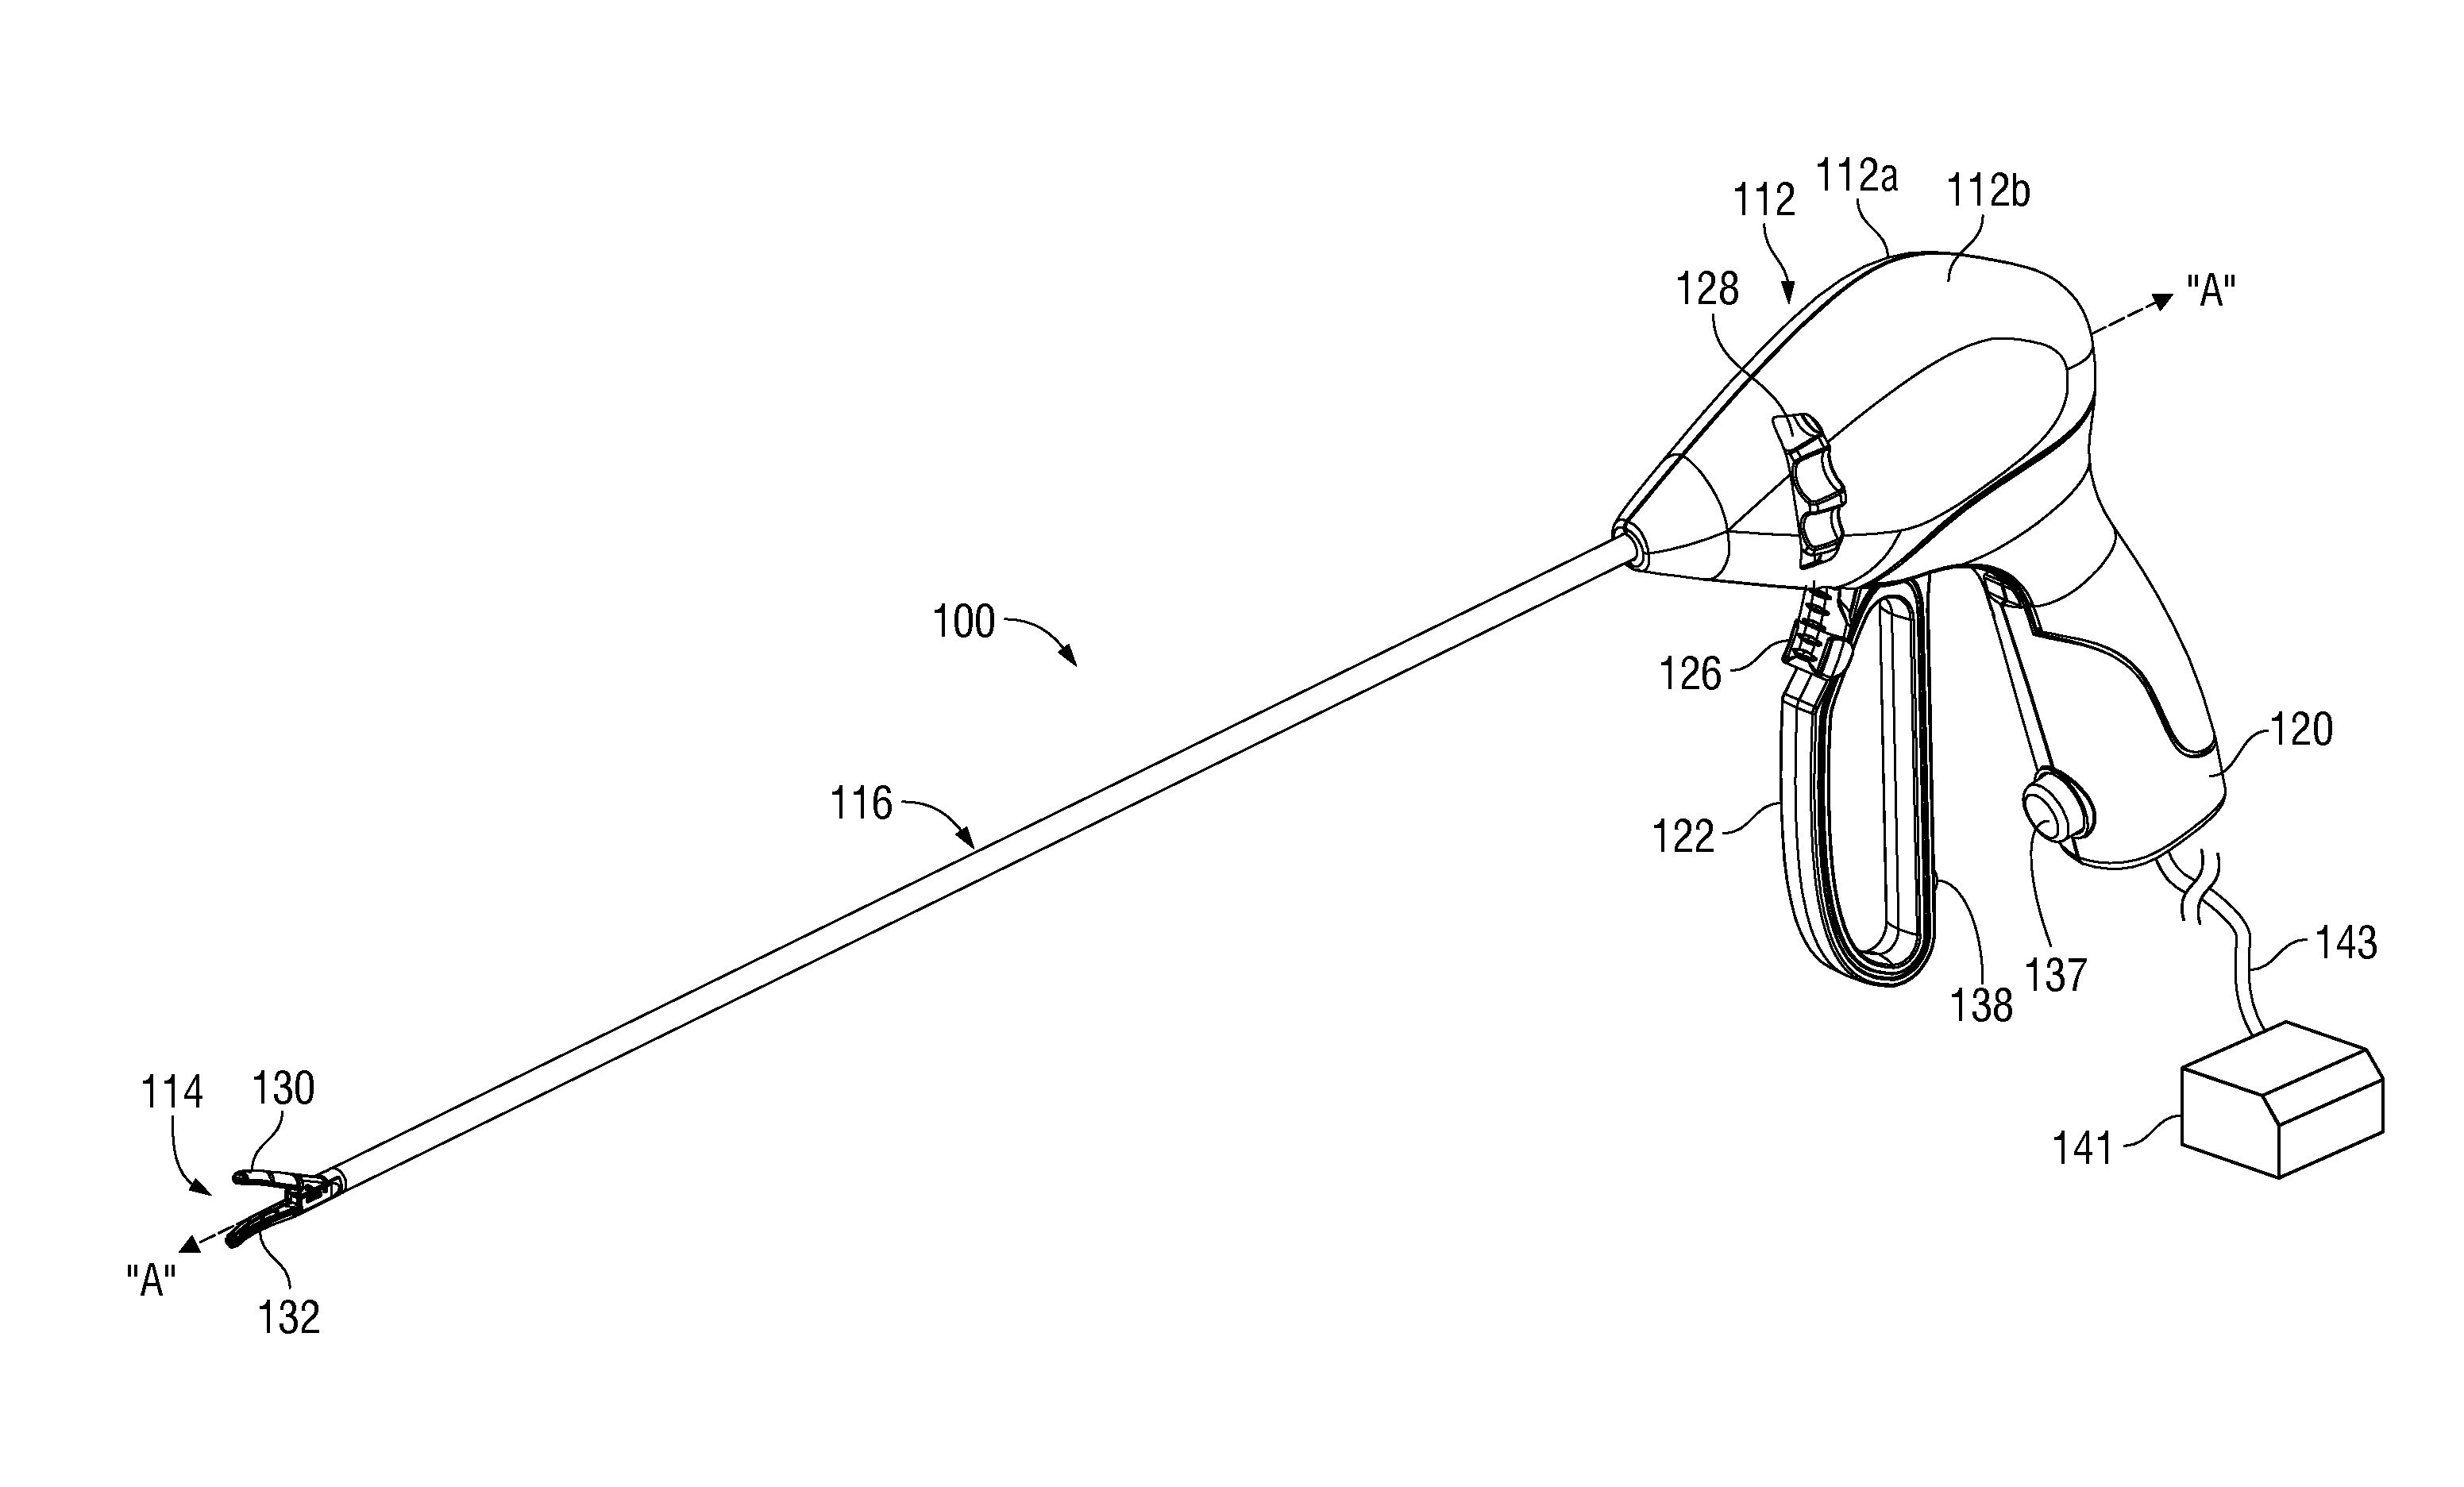 Tissue sealing instrument with tissue-dissecting electrode